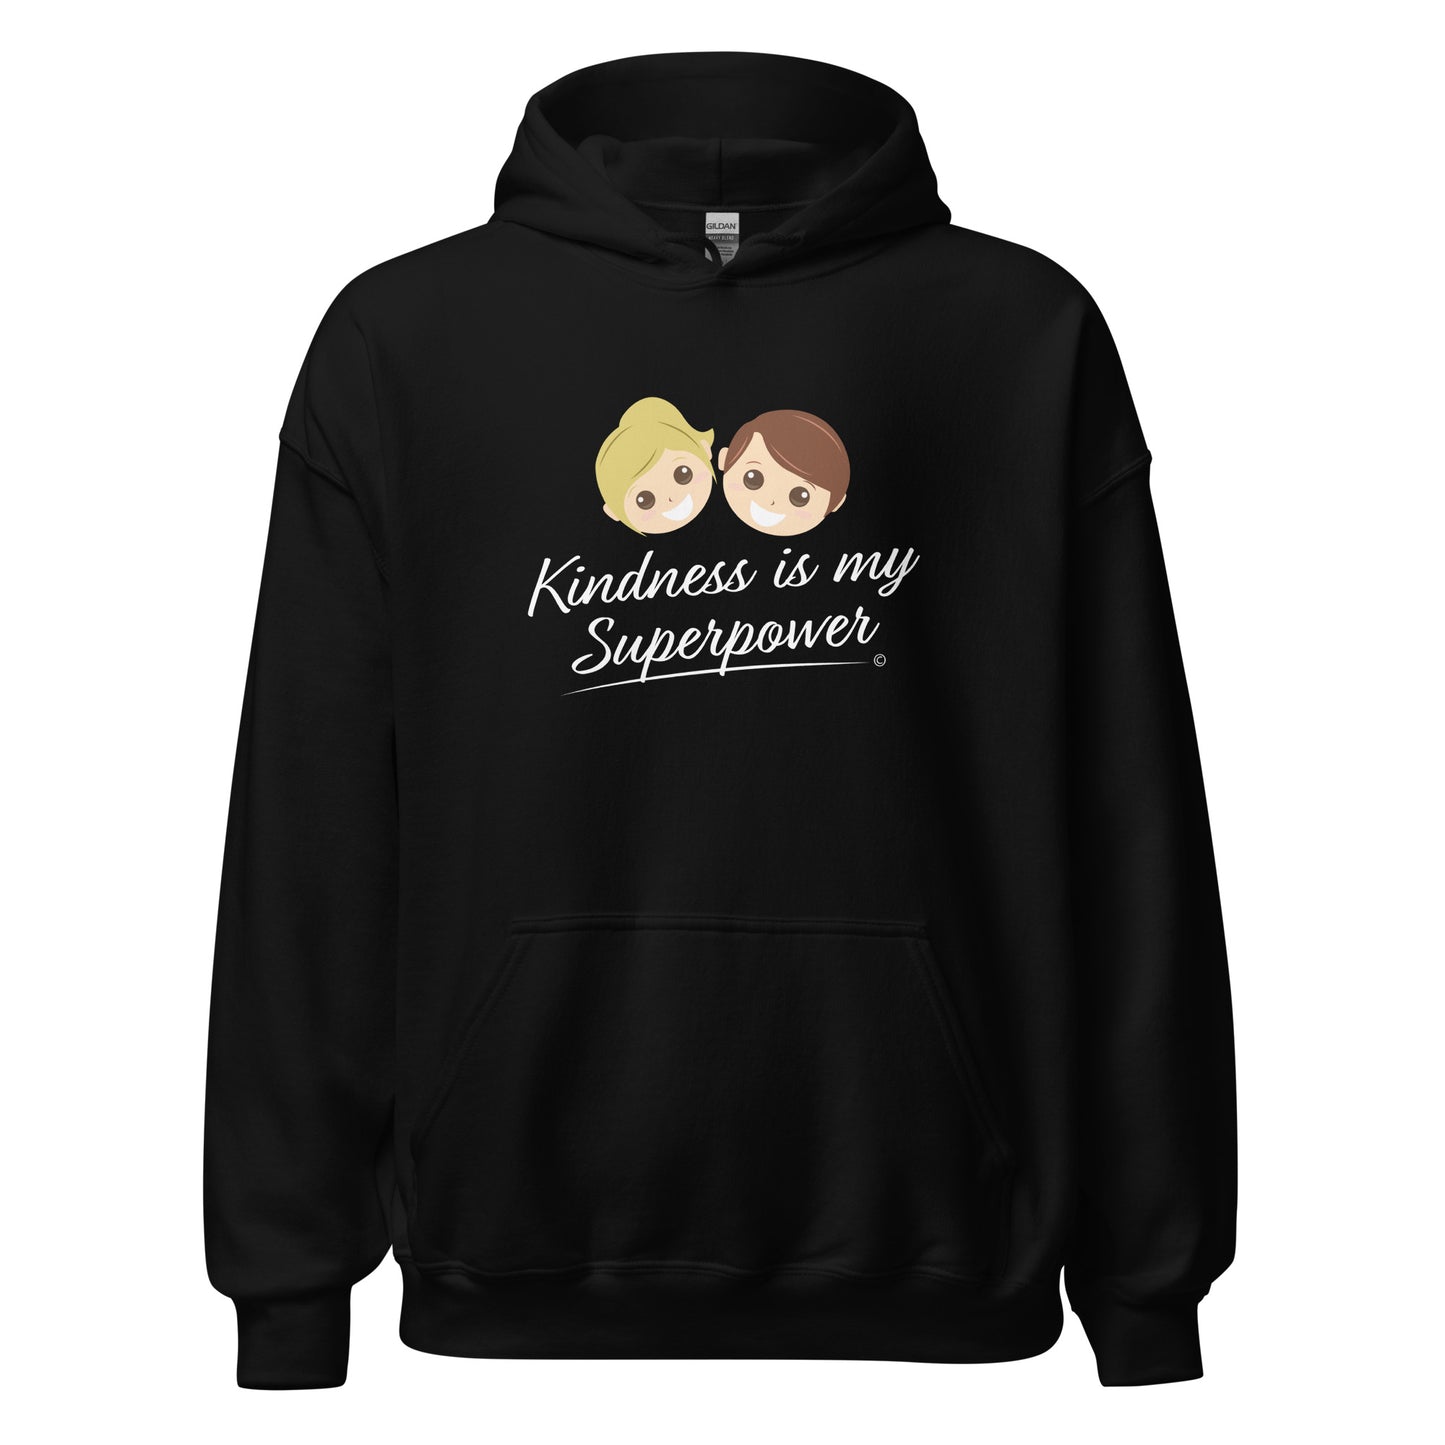 A cozy unisex hoodie in black featuring the uplifting quote 'Kindness is my Superpower' in bold lettering.